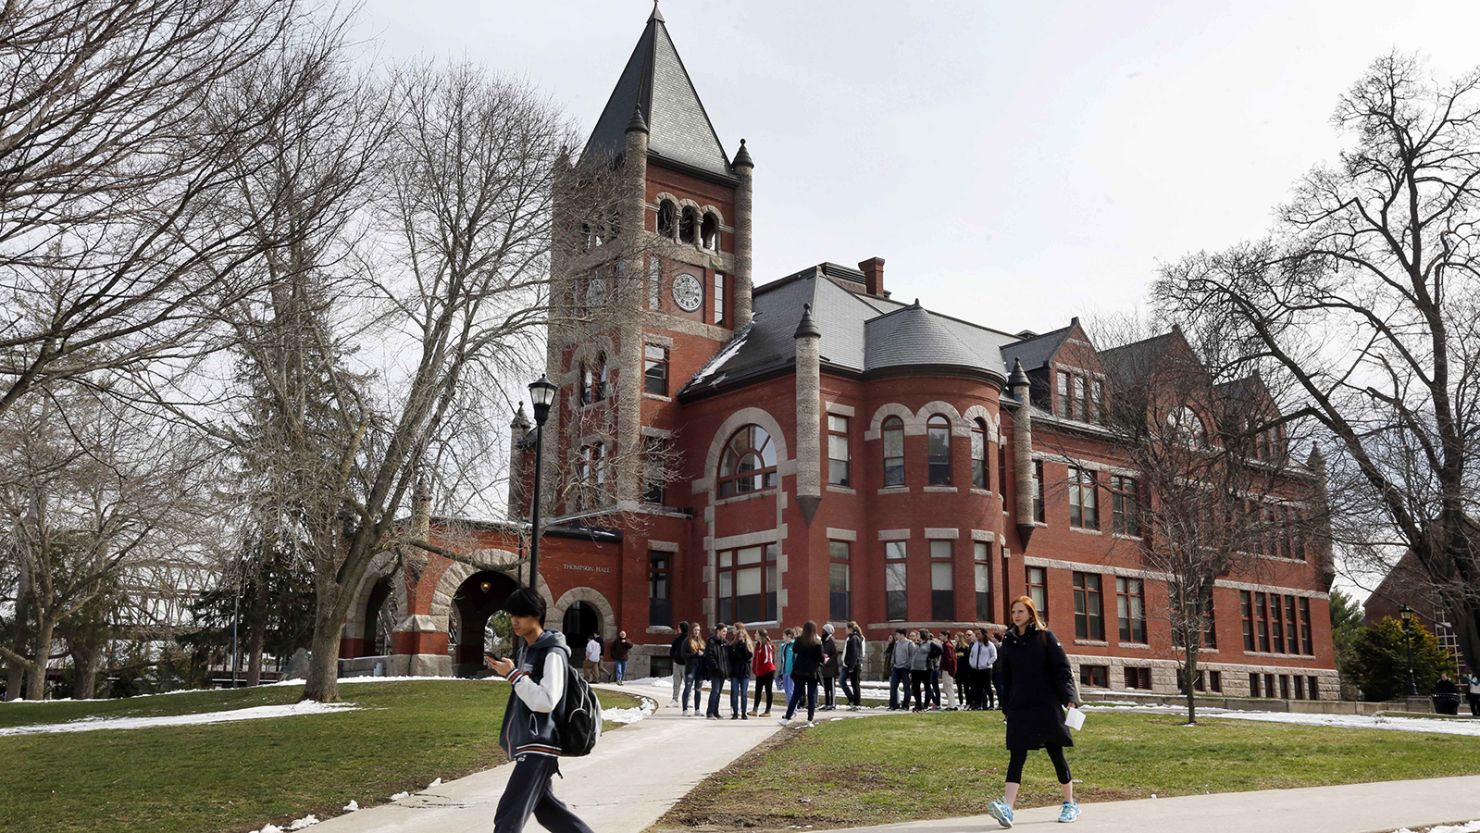 Students walk past the historic Thompson Hall at the University of New Hampshire in Durham in April 2016.